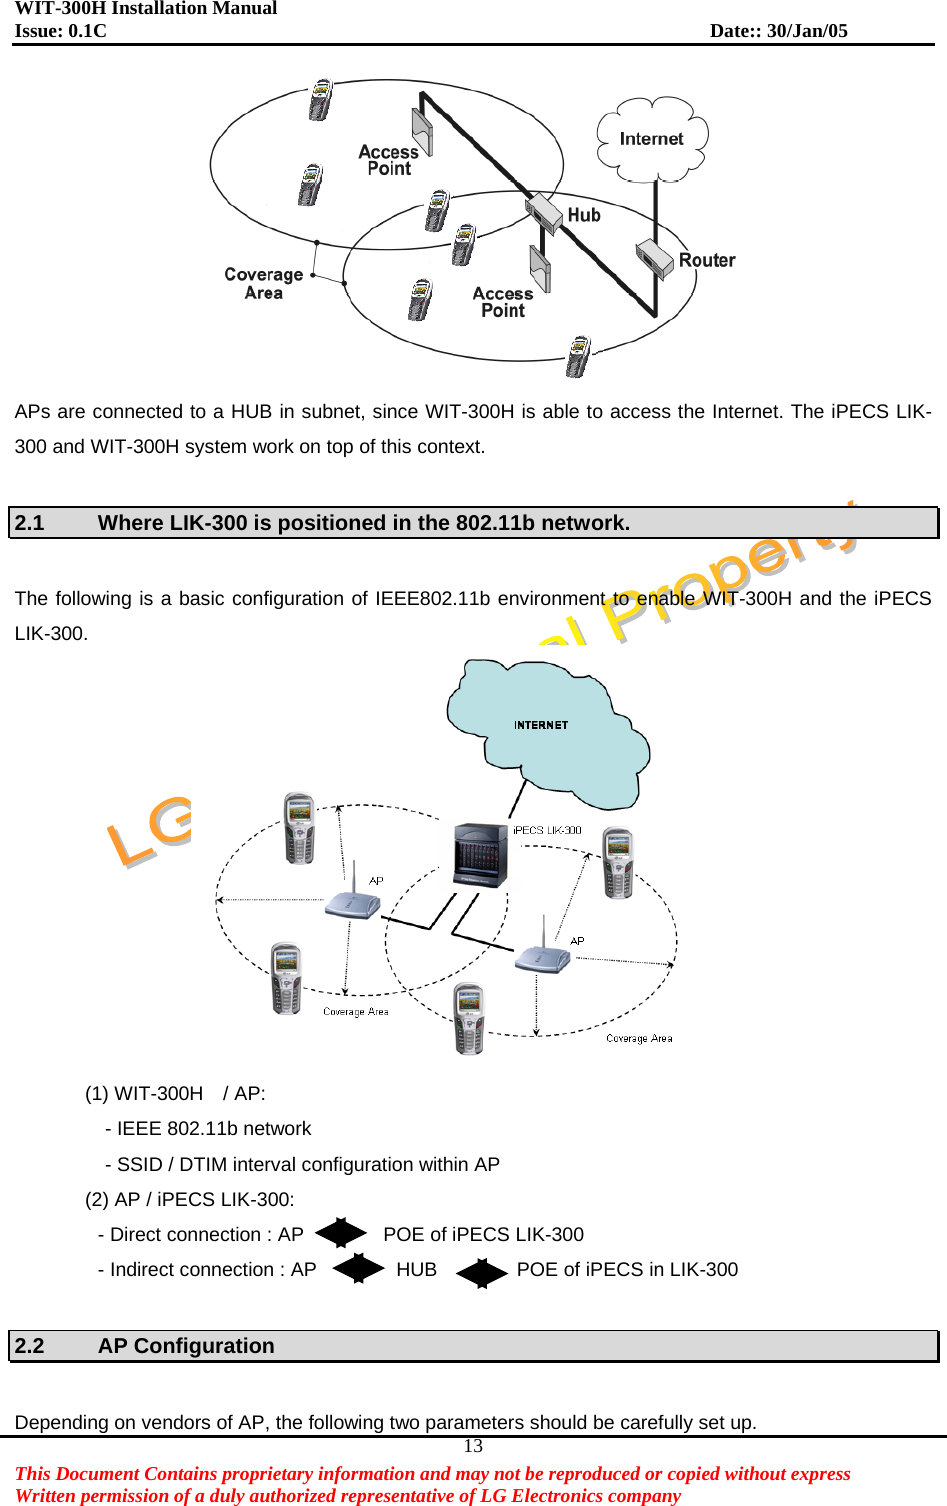 WIT-300H Installation Manual Issue: 0.1C              Date:: 30/Jan/05   This Document Contains proprietary information and may not be reproduced or copied without express   Written permission of a duly authorized representative of LG Electronics company 13 APs are connected to a HUB in subnet, since WIT-300H is able to access the Internet. The iPECS LIK-300 and WIT-300H system work on top of this context.    2.1  Where LIK-300 is positioned in the 802.11b network.  The following is a basic configuration of IEEE802.11b environment to enable WIT-300H and the iPECS LIK-300.   (1) WIT-300H  / AP:    - IEEE 802.11b network      - SSID / DTIM interval configuration within AP (2) AP / iPECS LIK-300: - Direct connection : AP        POE of iPECS LIK-300 - Indirect connection : AP        HUB        POE of iPECS in LIK-300  2.2 AP Configuration  Depending on vendors of AP, the following two parameters should be carefully set up. 